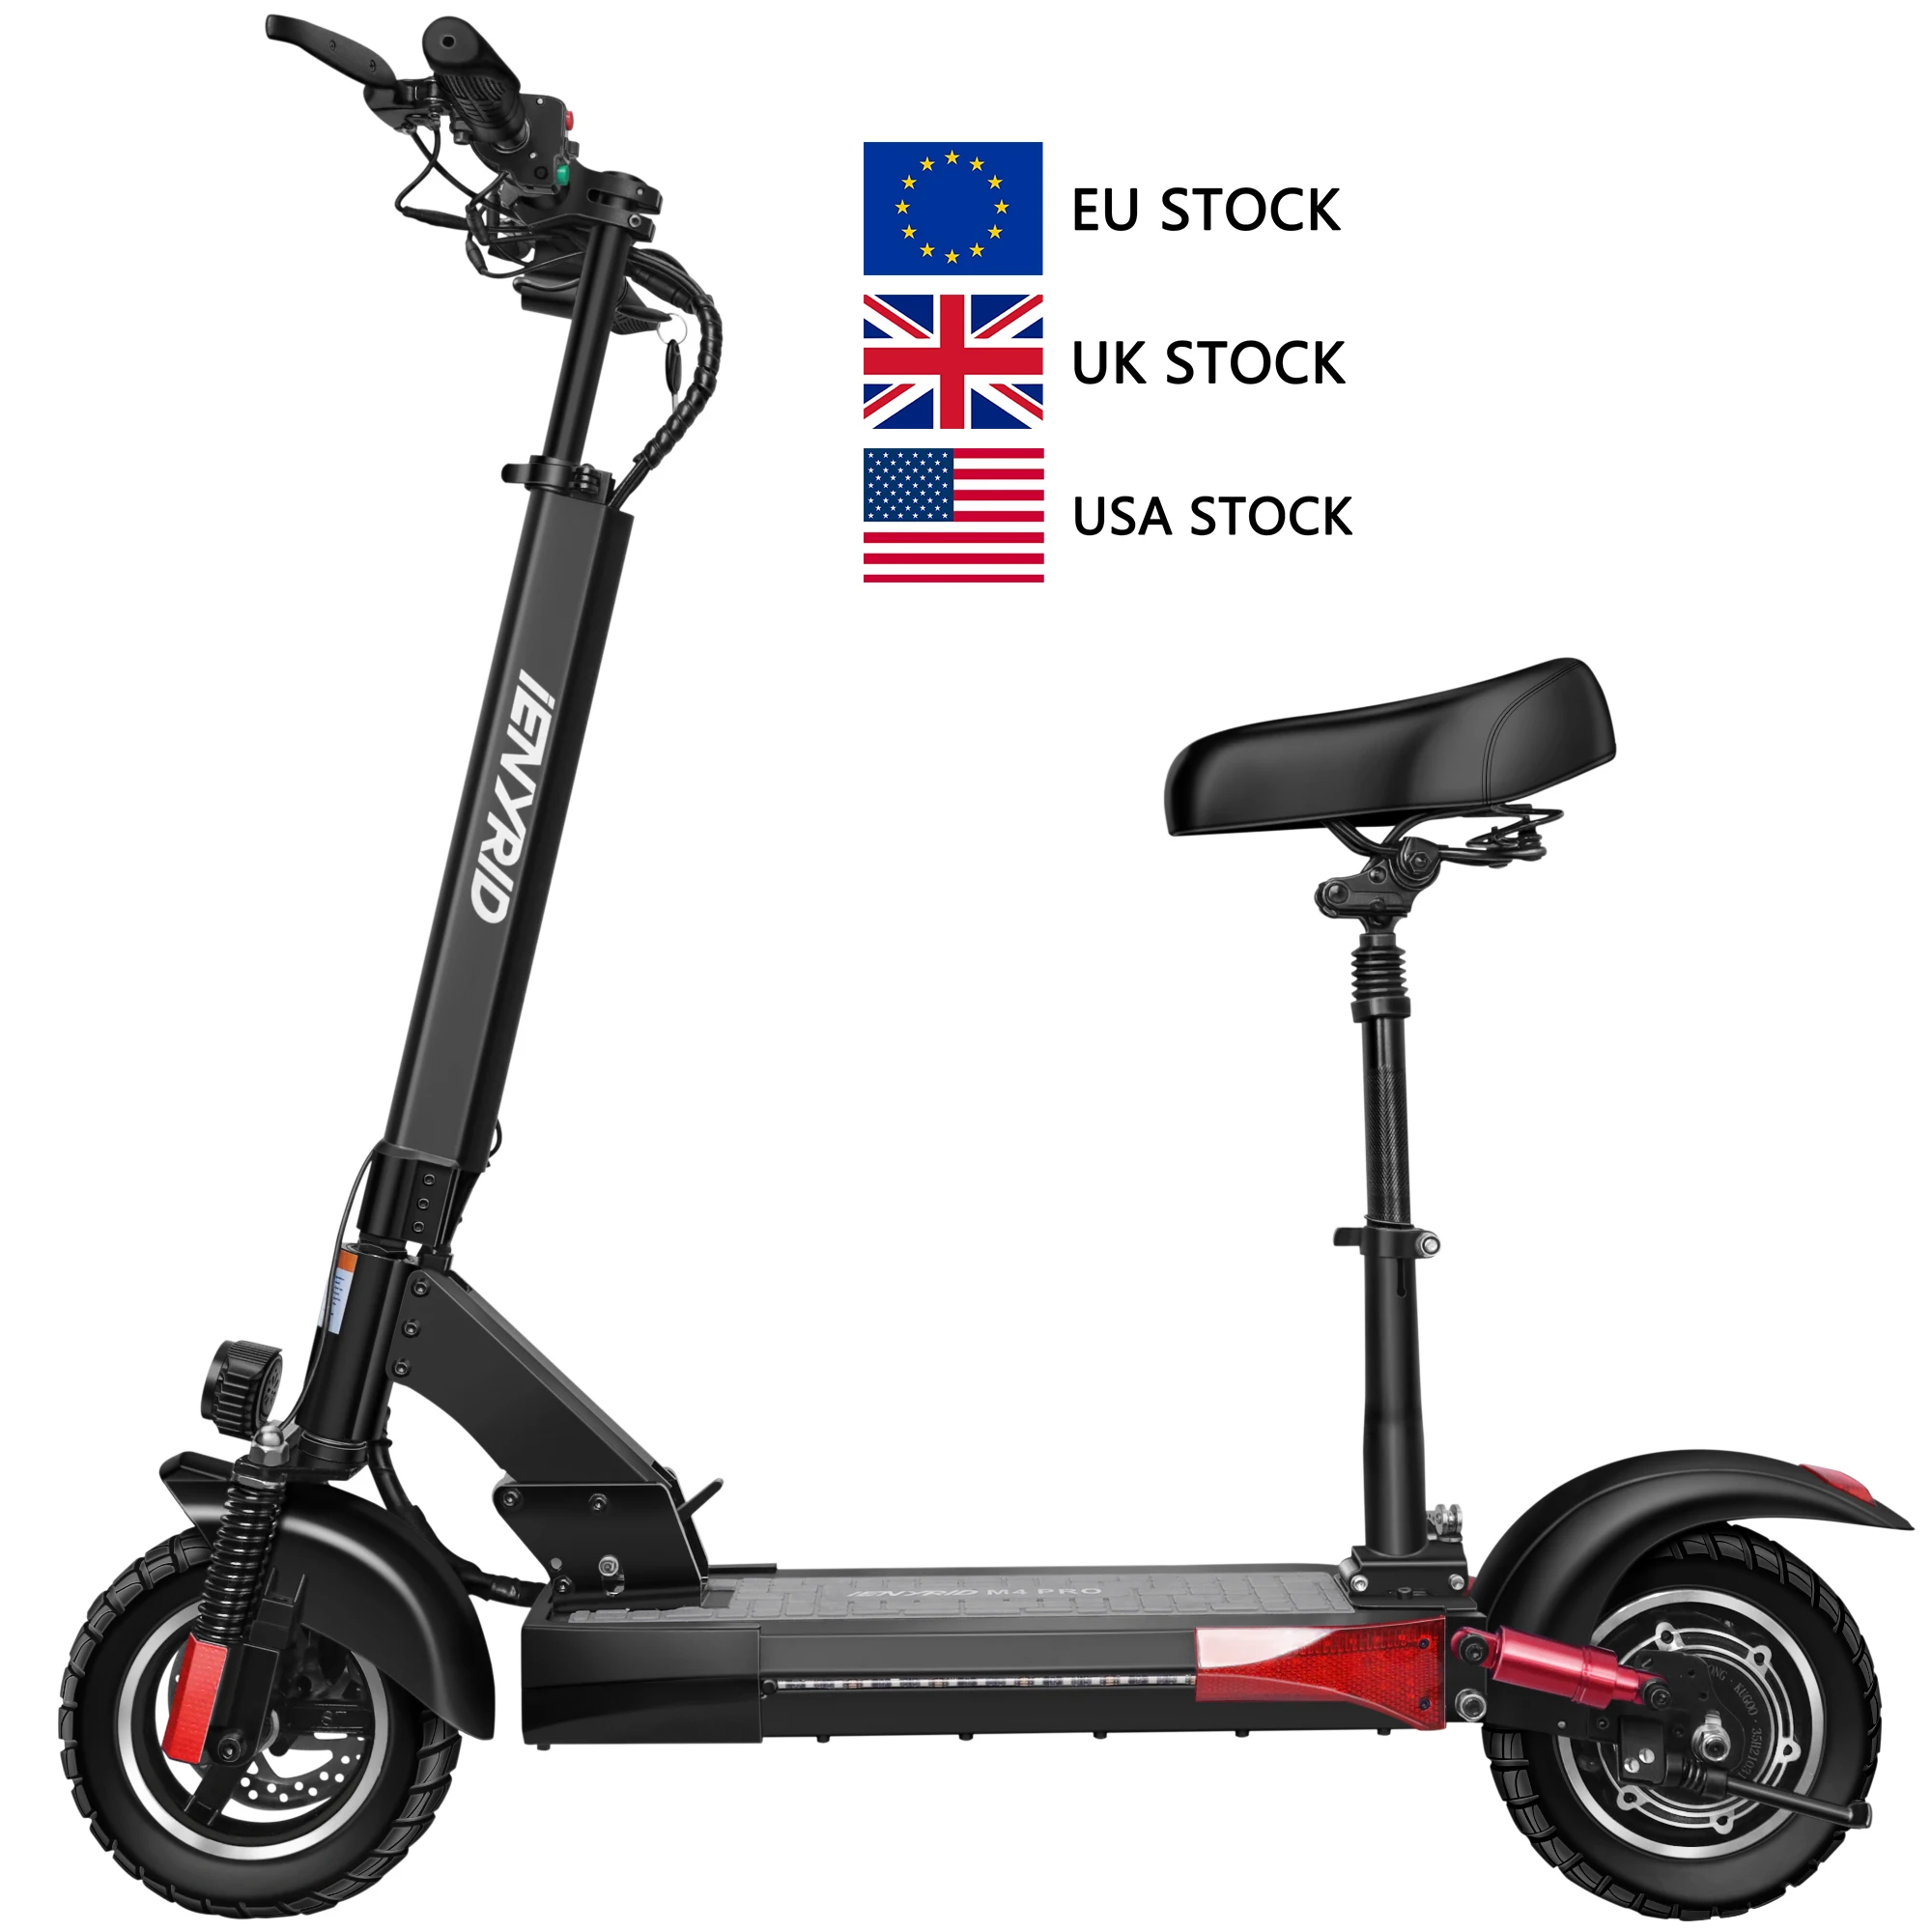 EU US UK IENYRID M4 PRO Electric Motorcycles 2 Wheel Foldable Self Balancing Electric Scooter 500w electric bike scooter